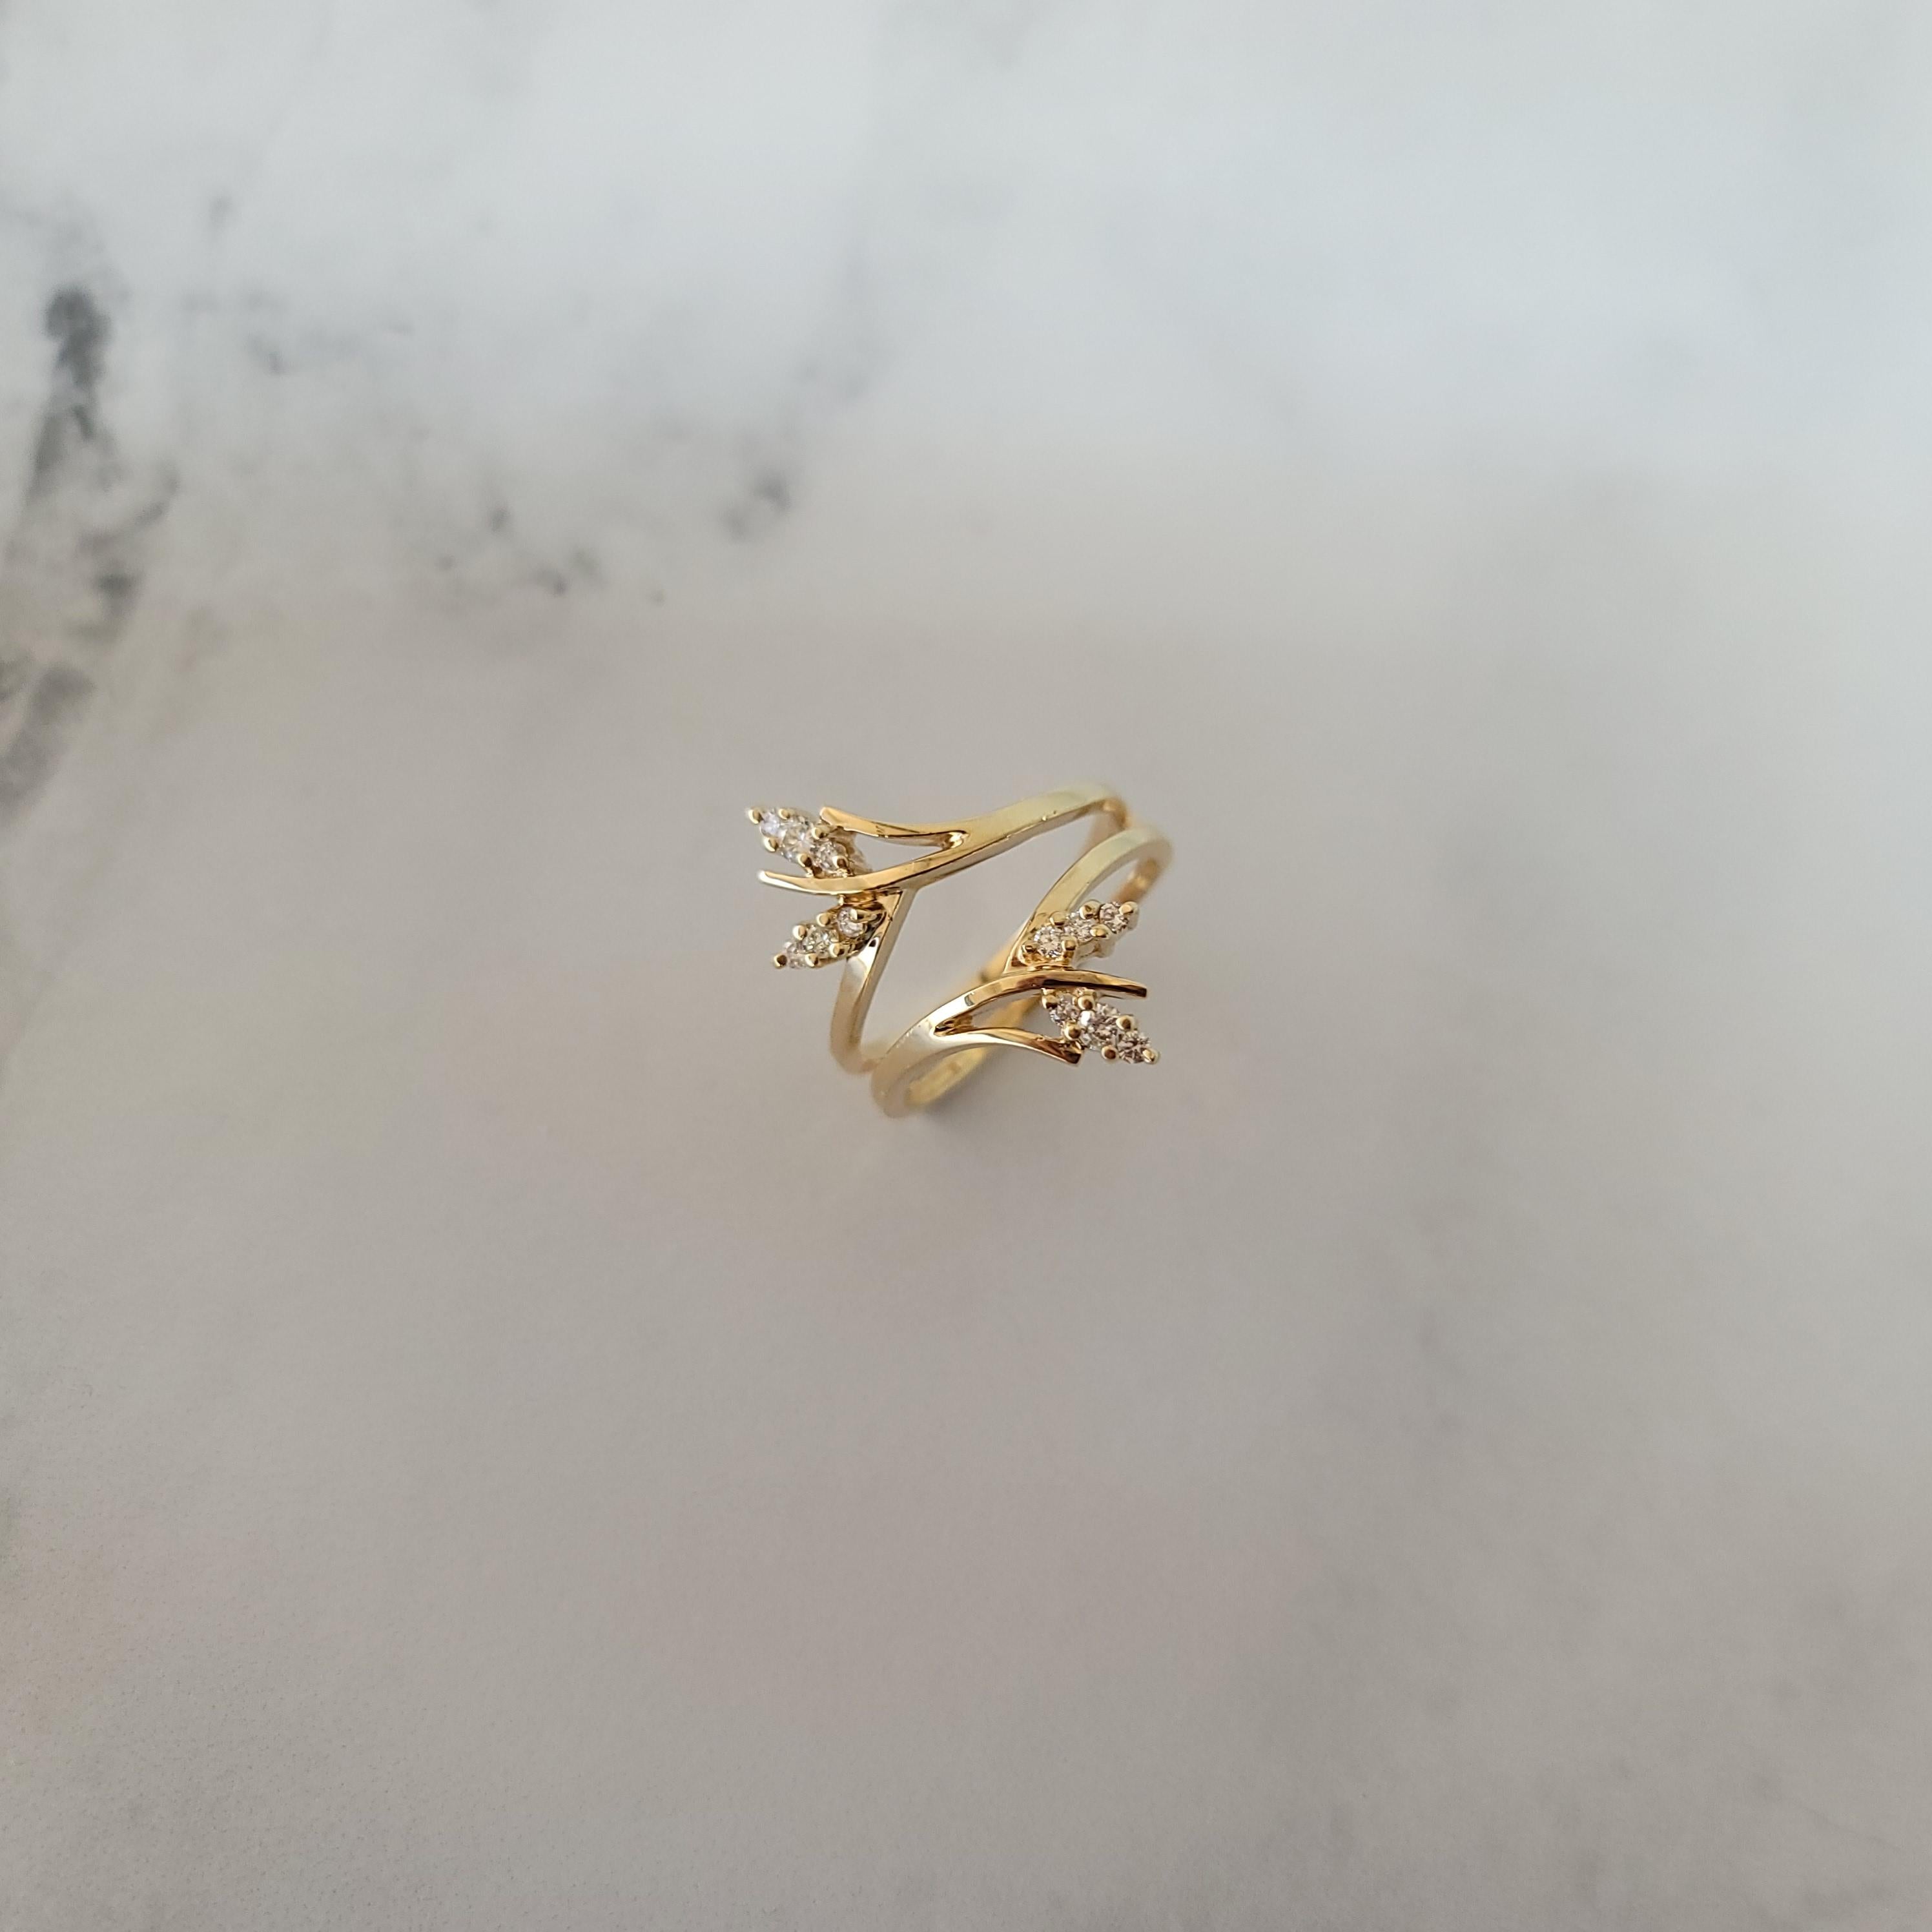 Leaf Style Diamond Ring Guard .33cttw 14k Yellow Gold In New Condition For Sale In Sugar Land, TX